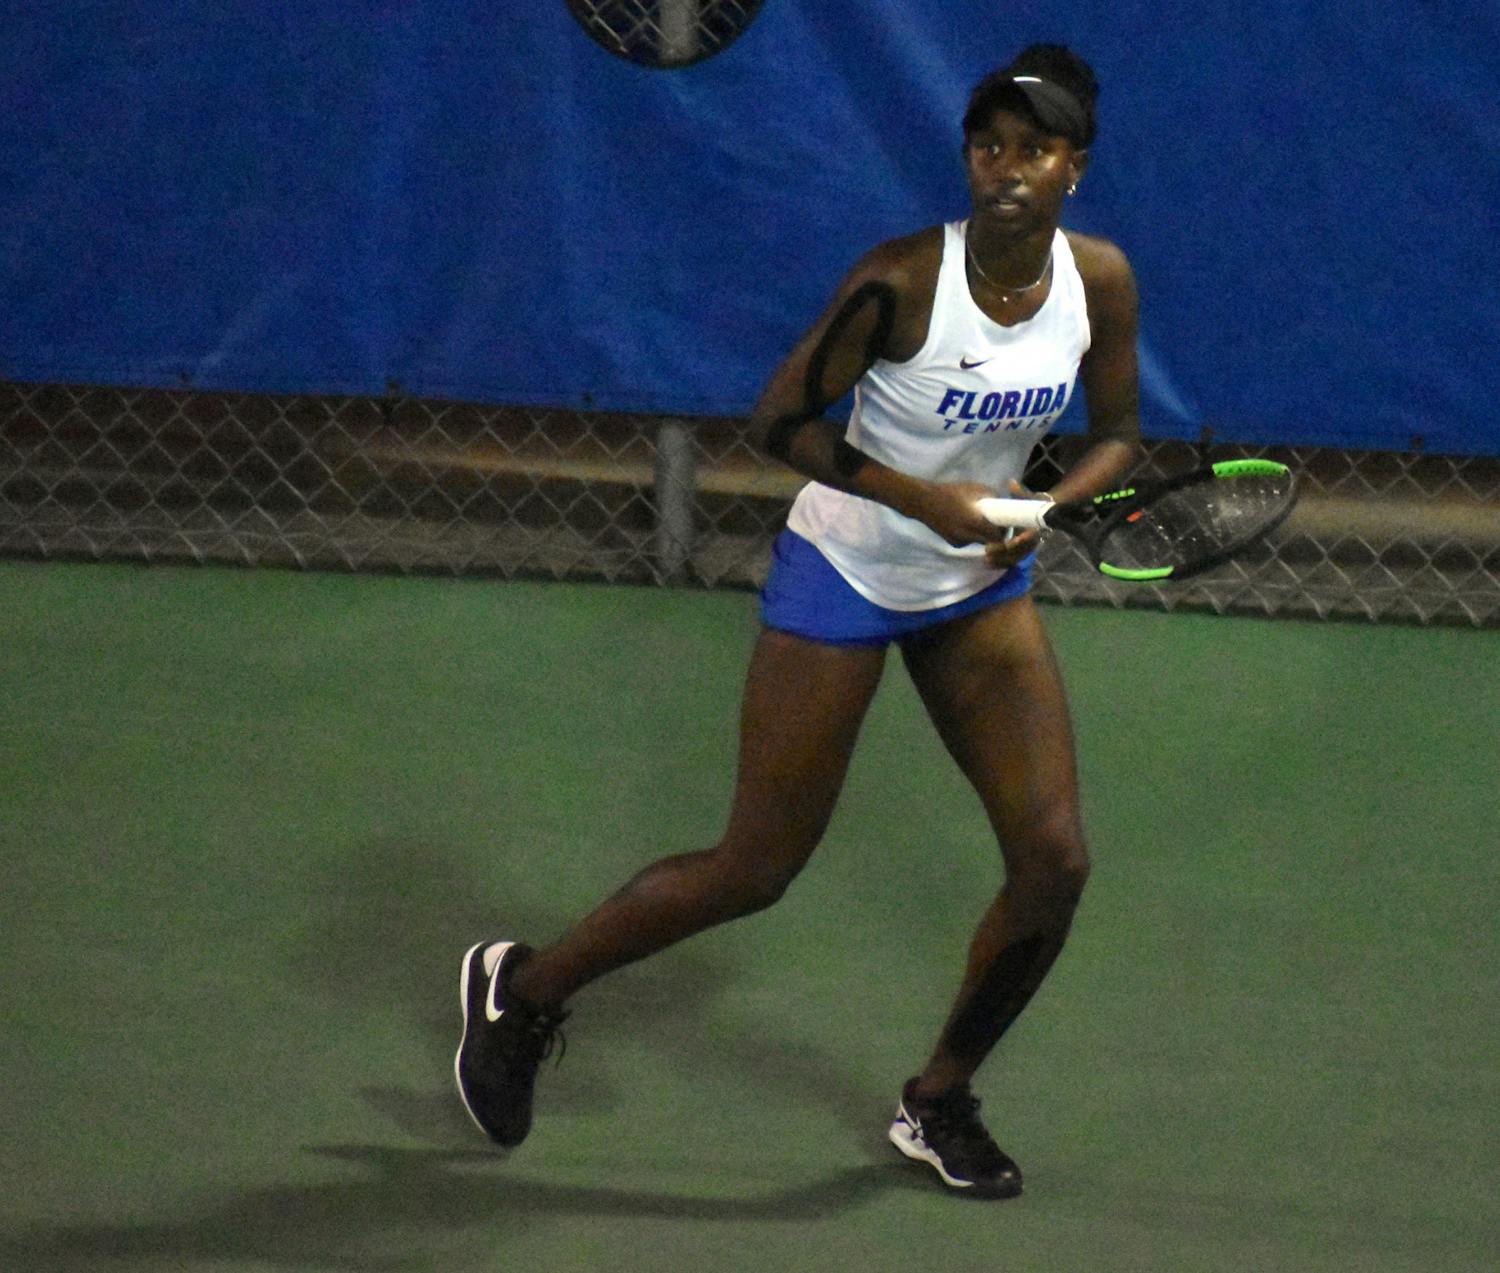 Florida senior Marlee Zein competes in a match against Central Florida on Feb. 9, 2021. The Gators overcame their matchup Friday night against the Kentucky Wildcats